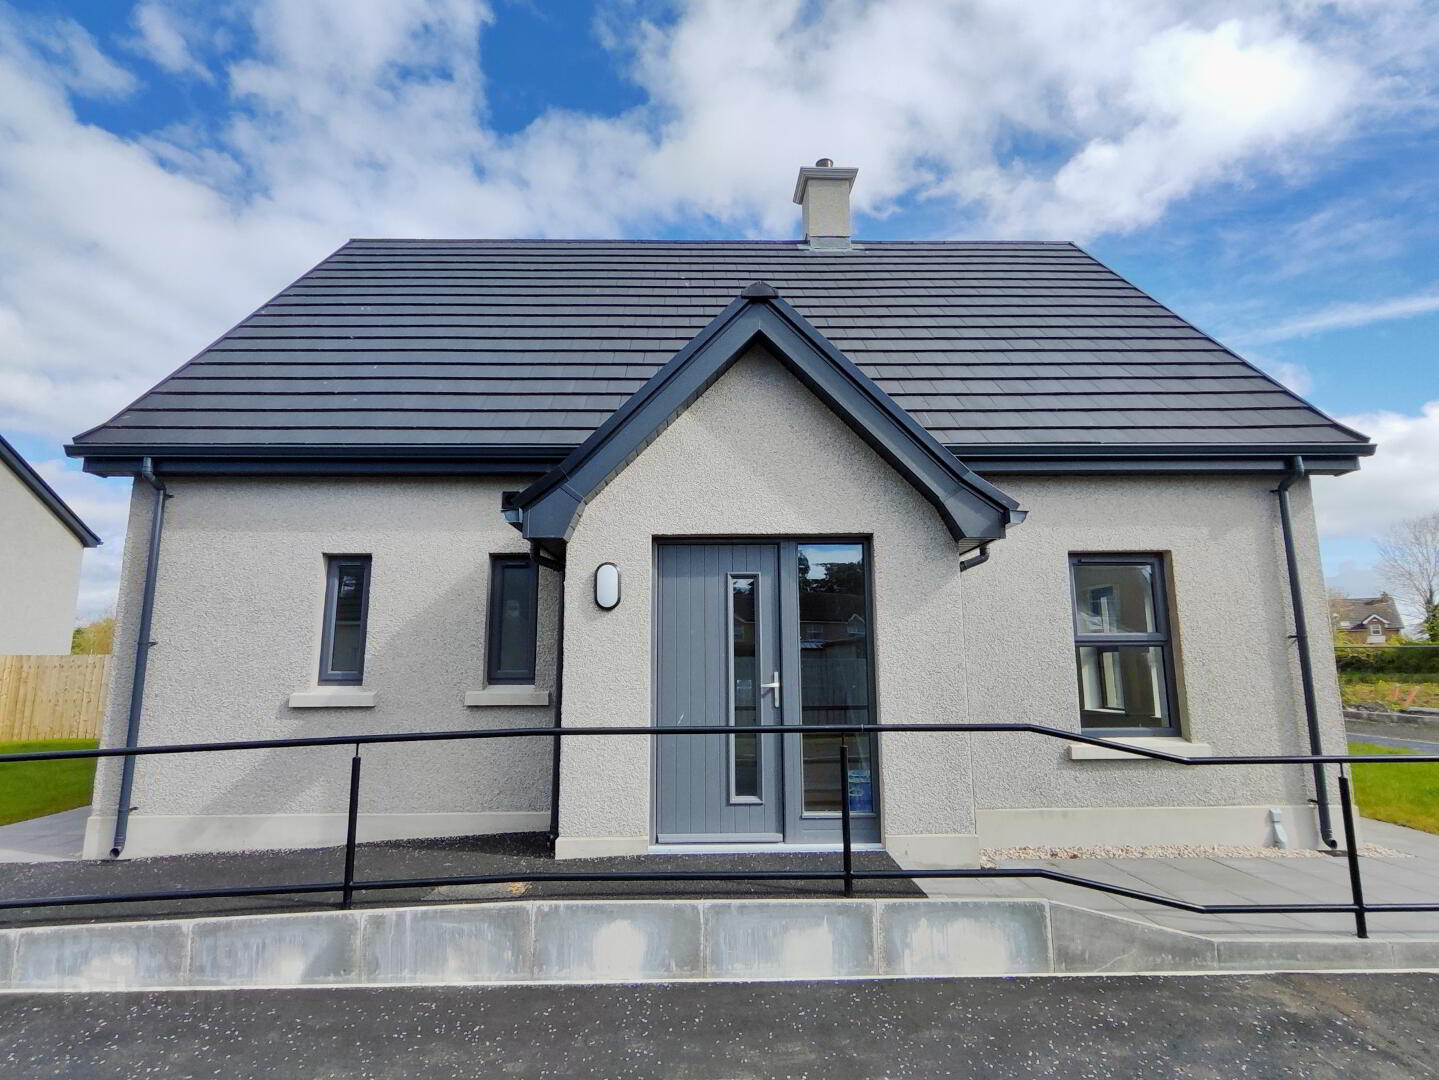 Detached (3 Bed) House Type D